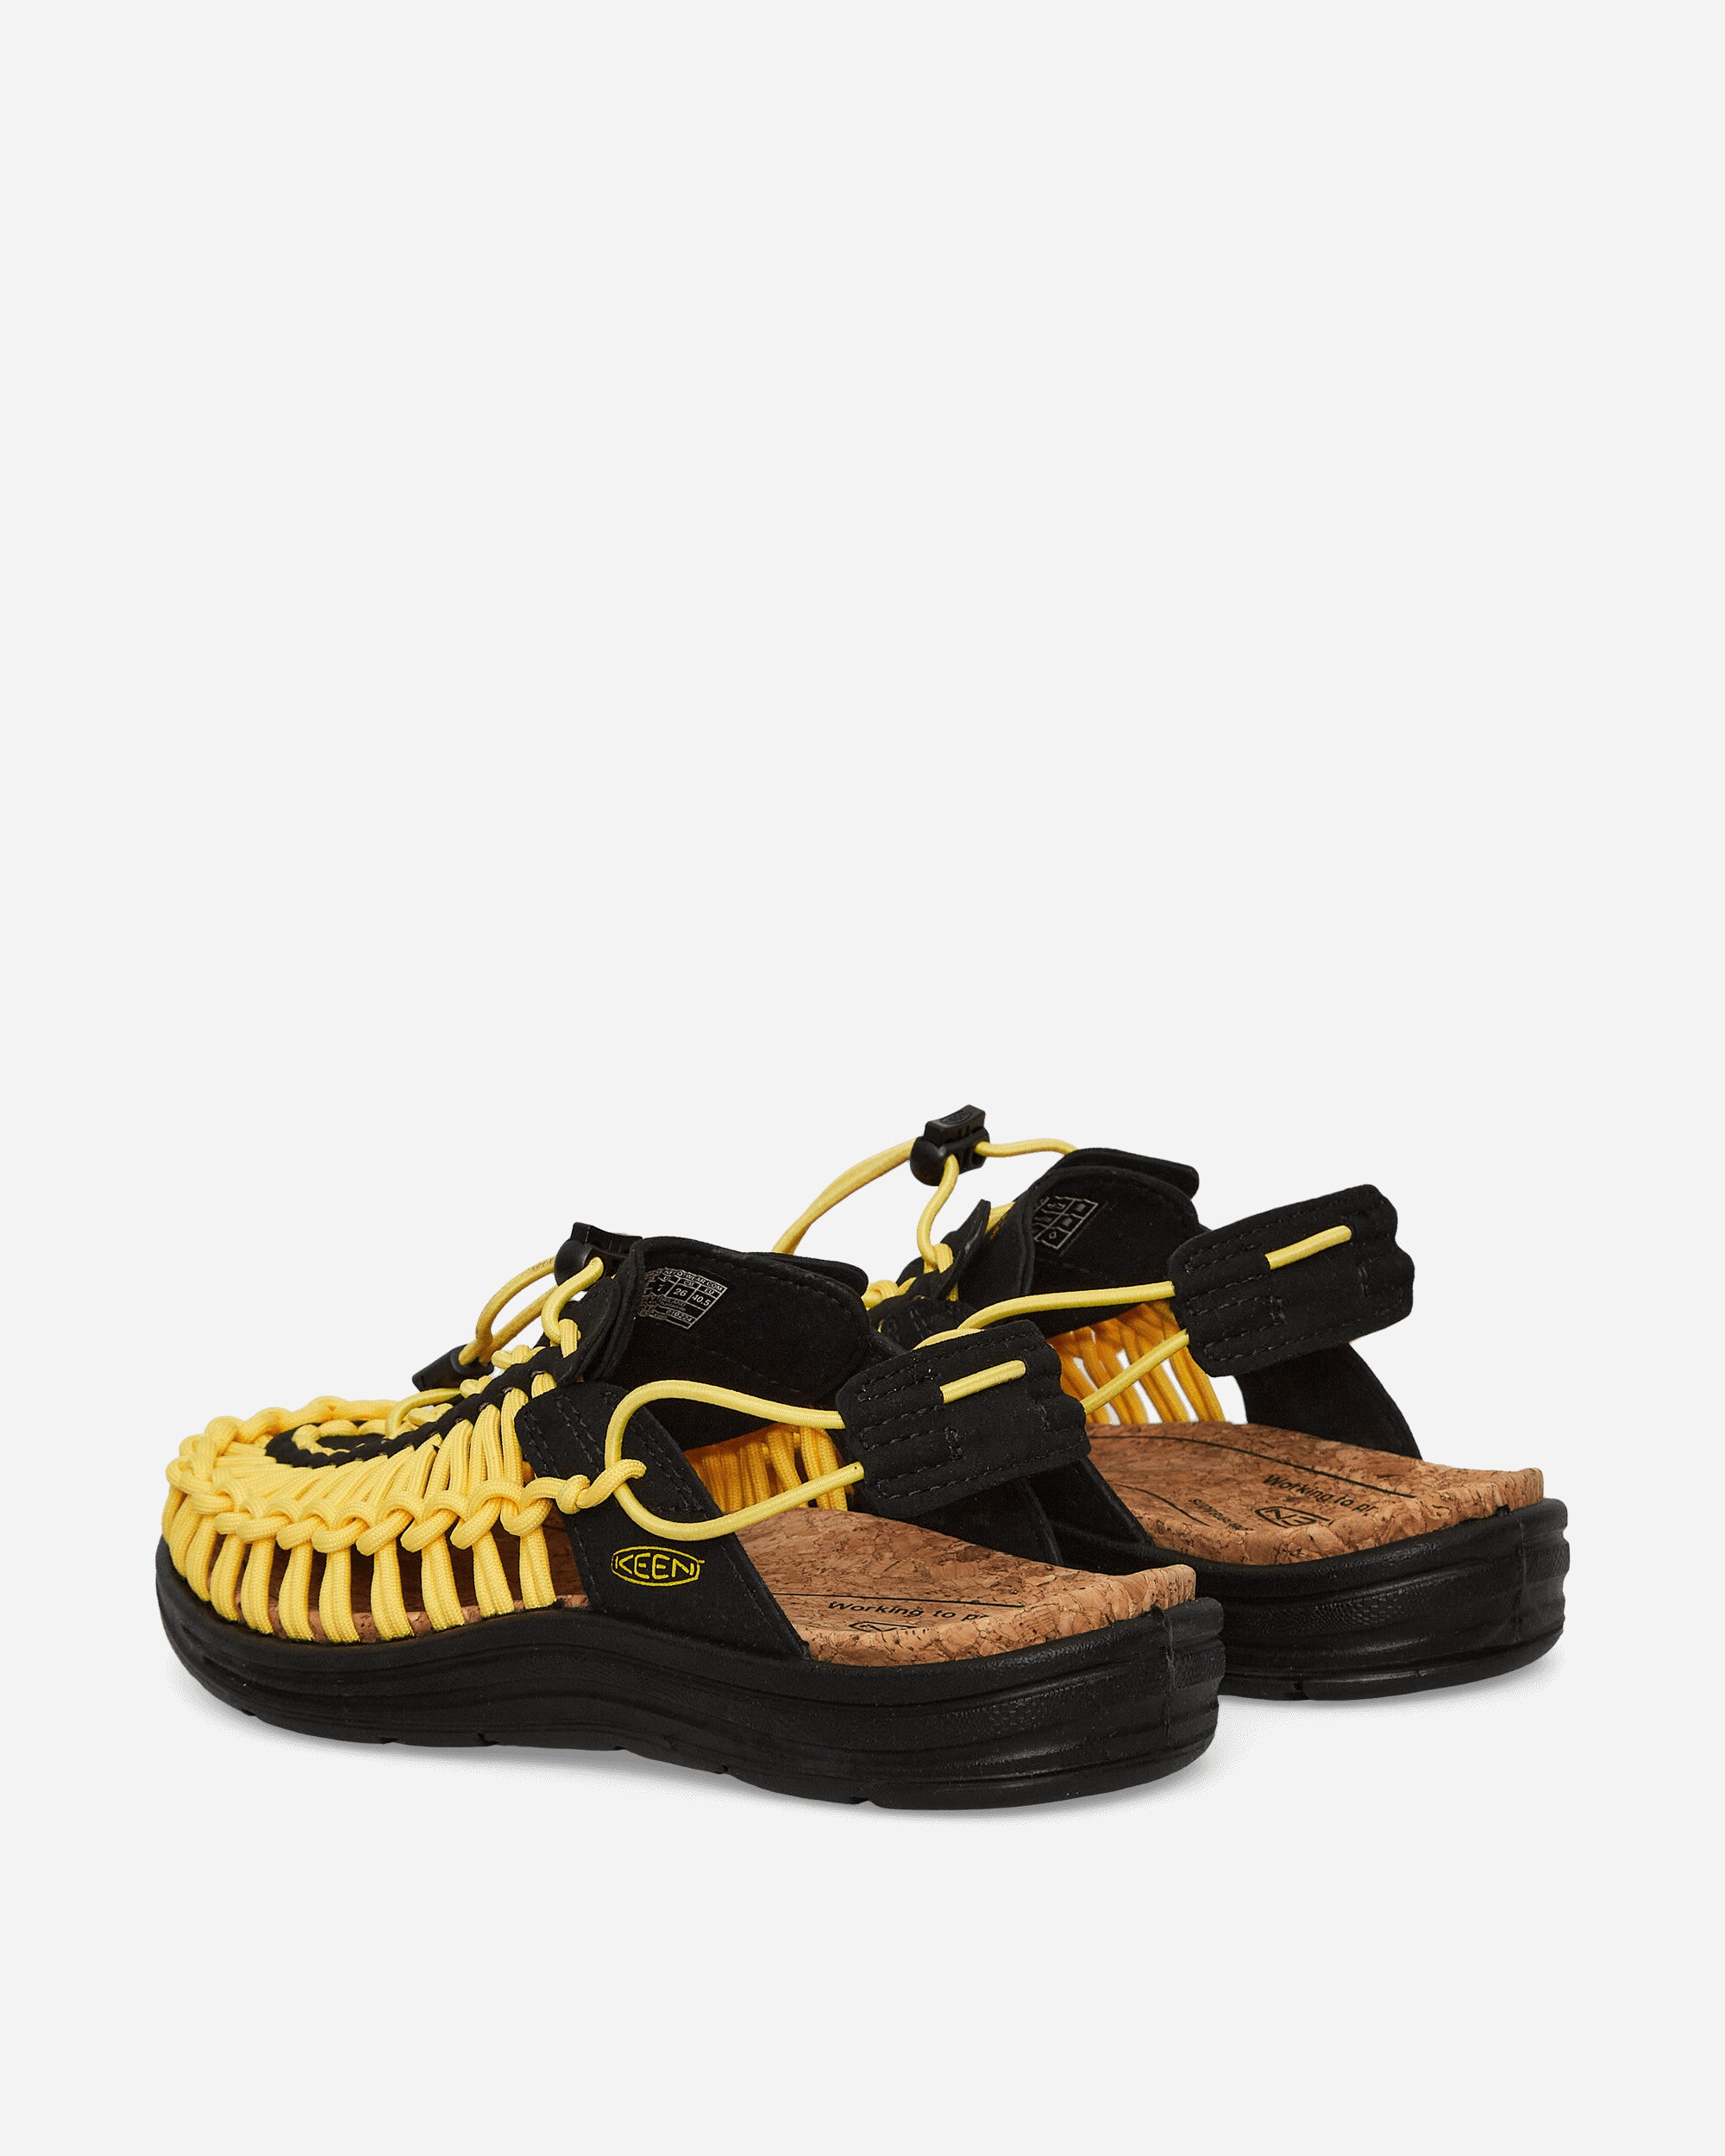 Keen Uneek Ii Black/Keen Yellow Sandals and Slides Sandals and Mules 1028665 001